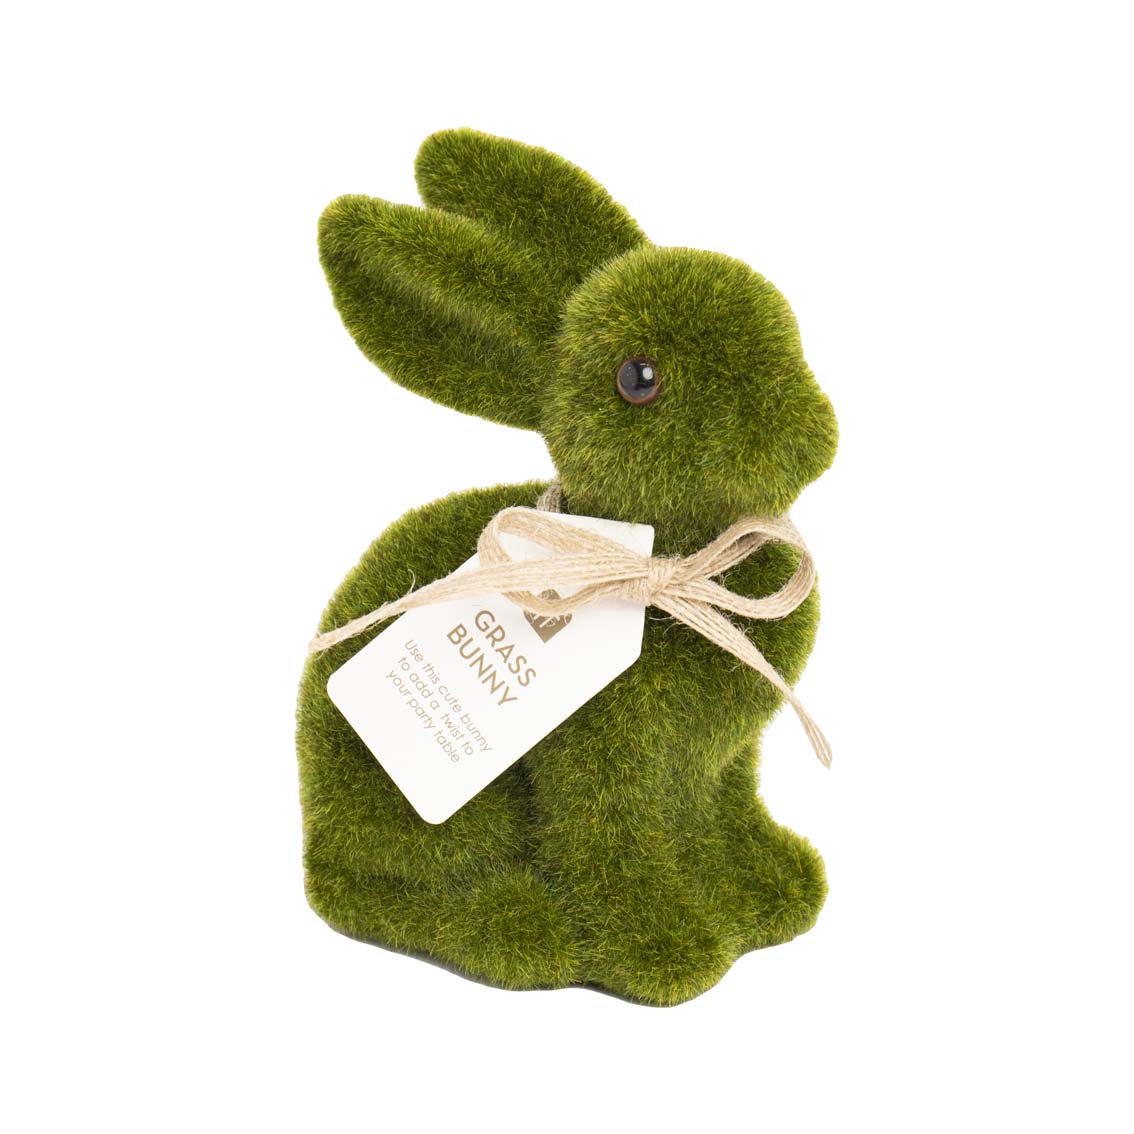 Green Grass Easter Bunny Decoration - 15cm